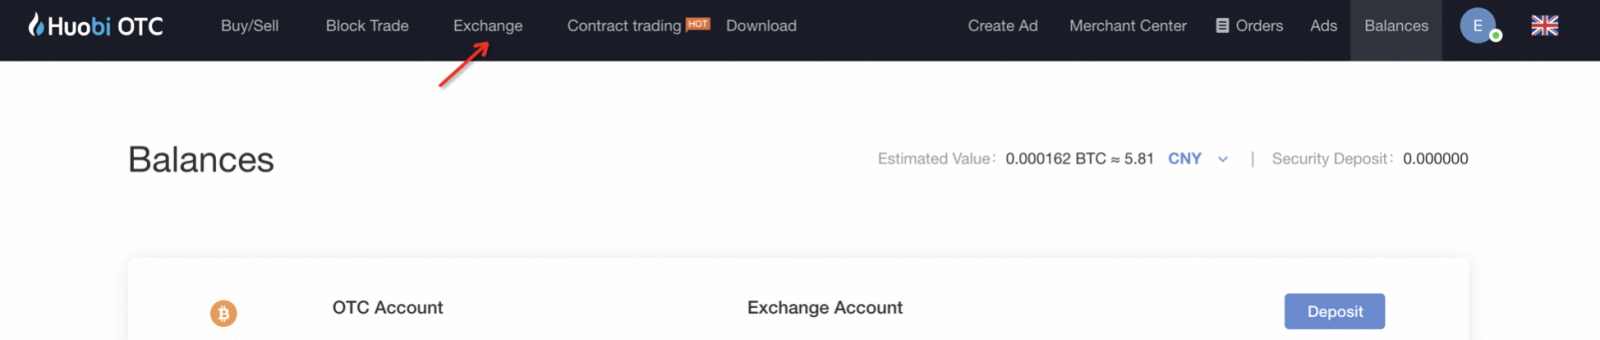 How to Buy Cryptocurrencies with Simplex in Huobi